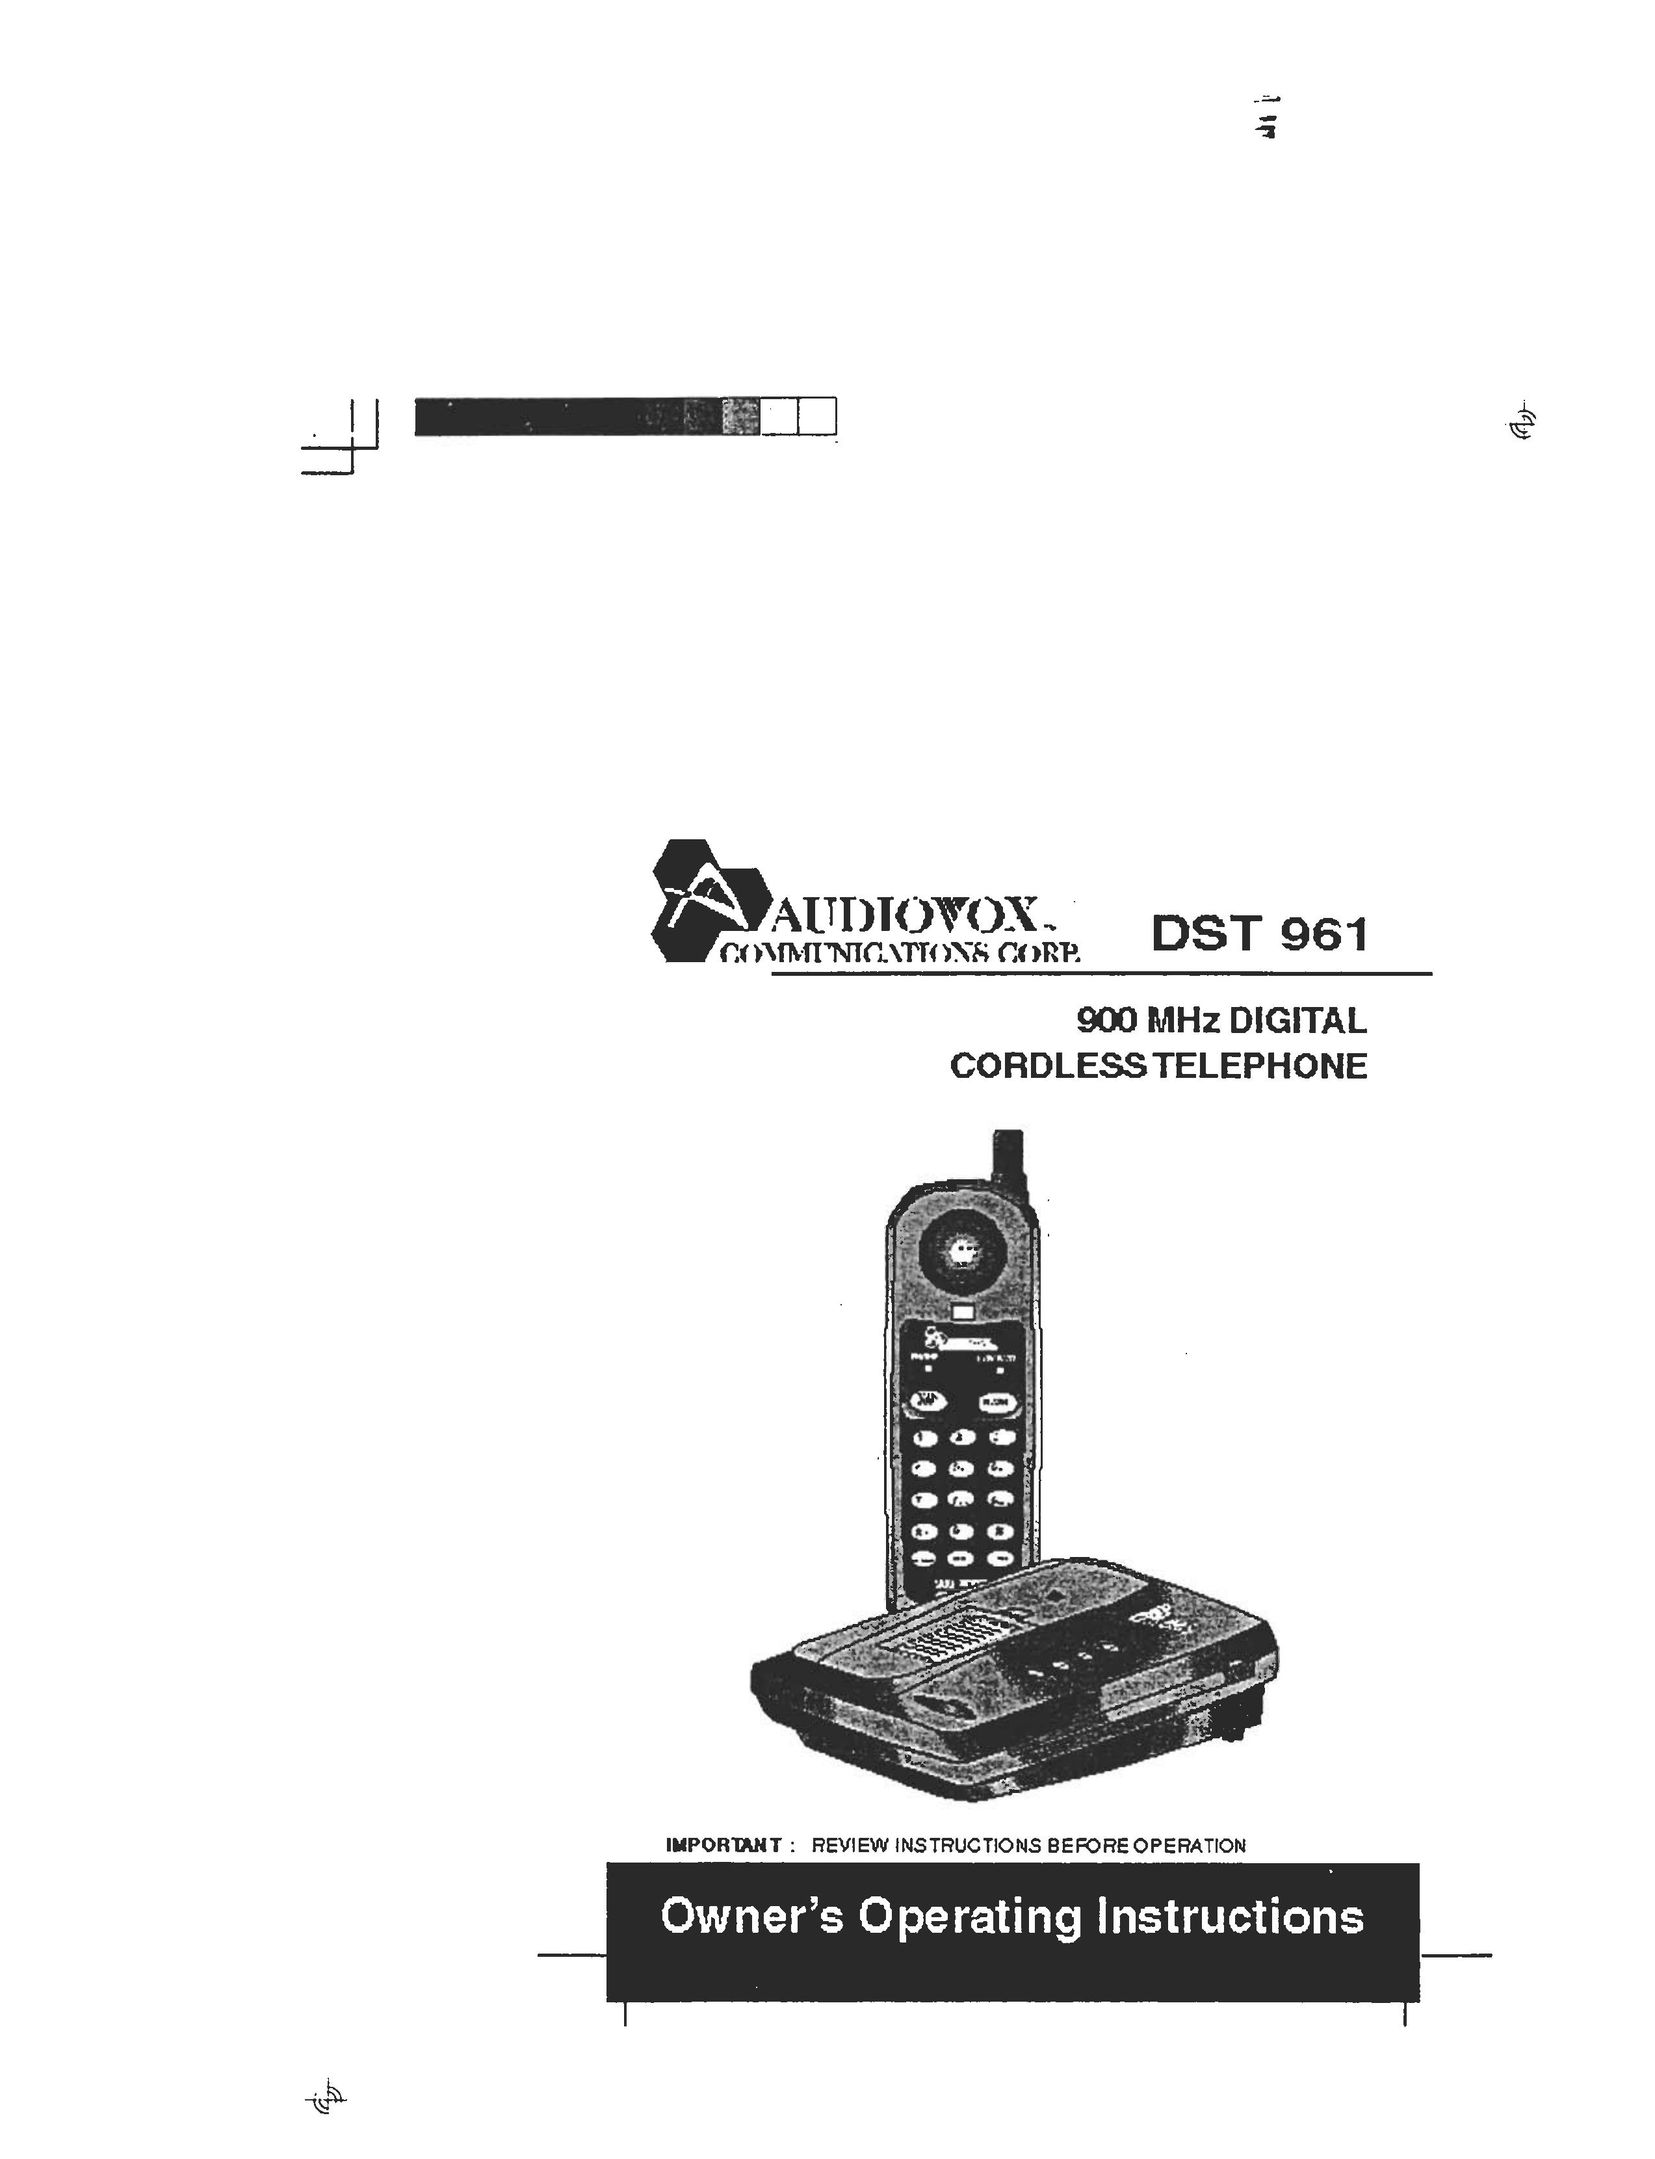 Audiovox DST 961 Cordless Telephone User Manual